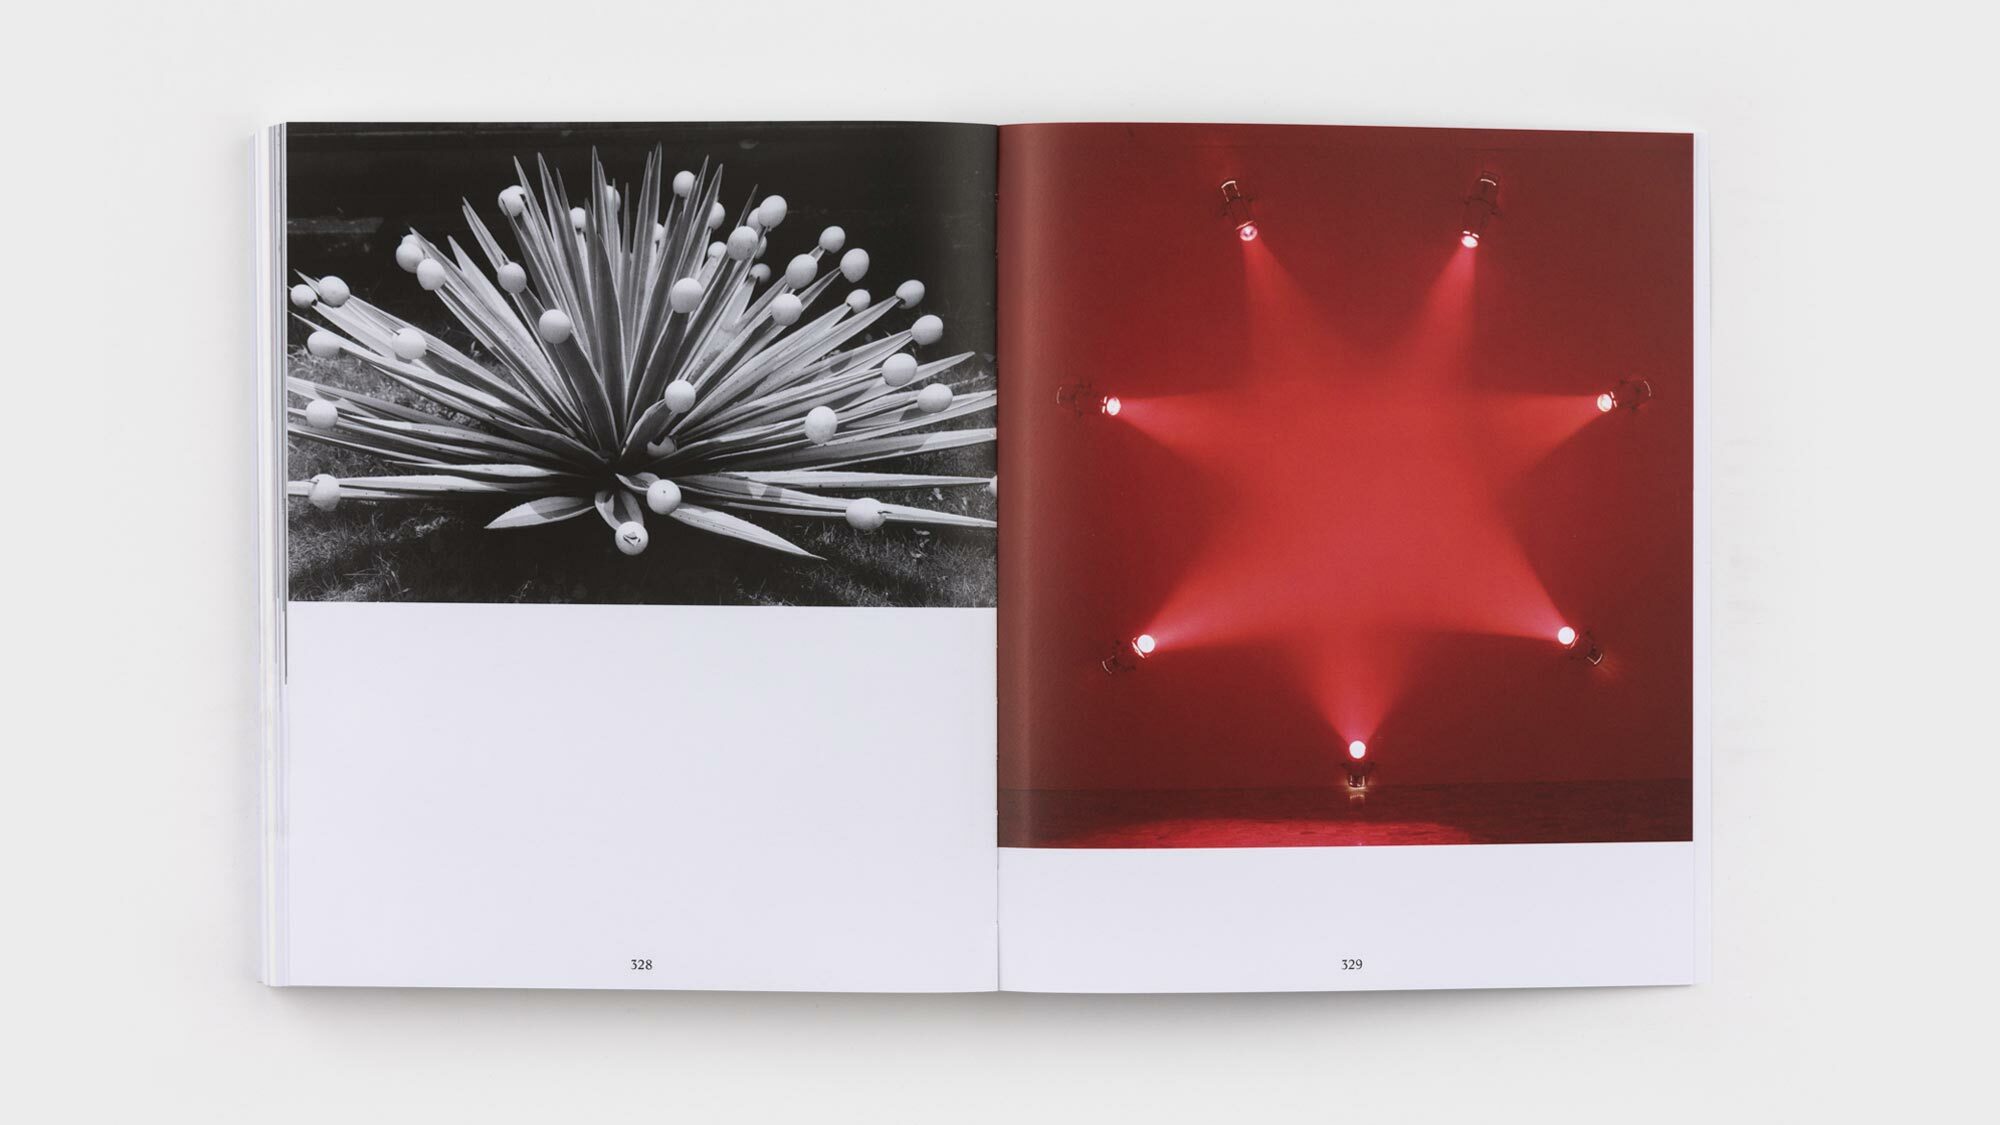 Pages 328 and 329. Filling the top-half of 328 is a black and white photograph by François of a low, spiky plant with eggs on the tips of its leaves. An image of one of Janssen's light works—seven spotlights forming a star of crimson—fills the top two-thirds of 329.